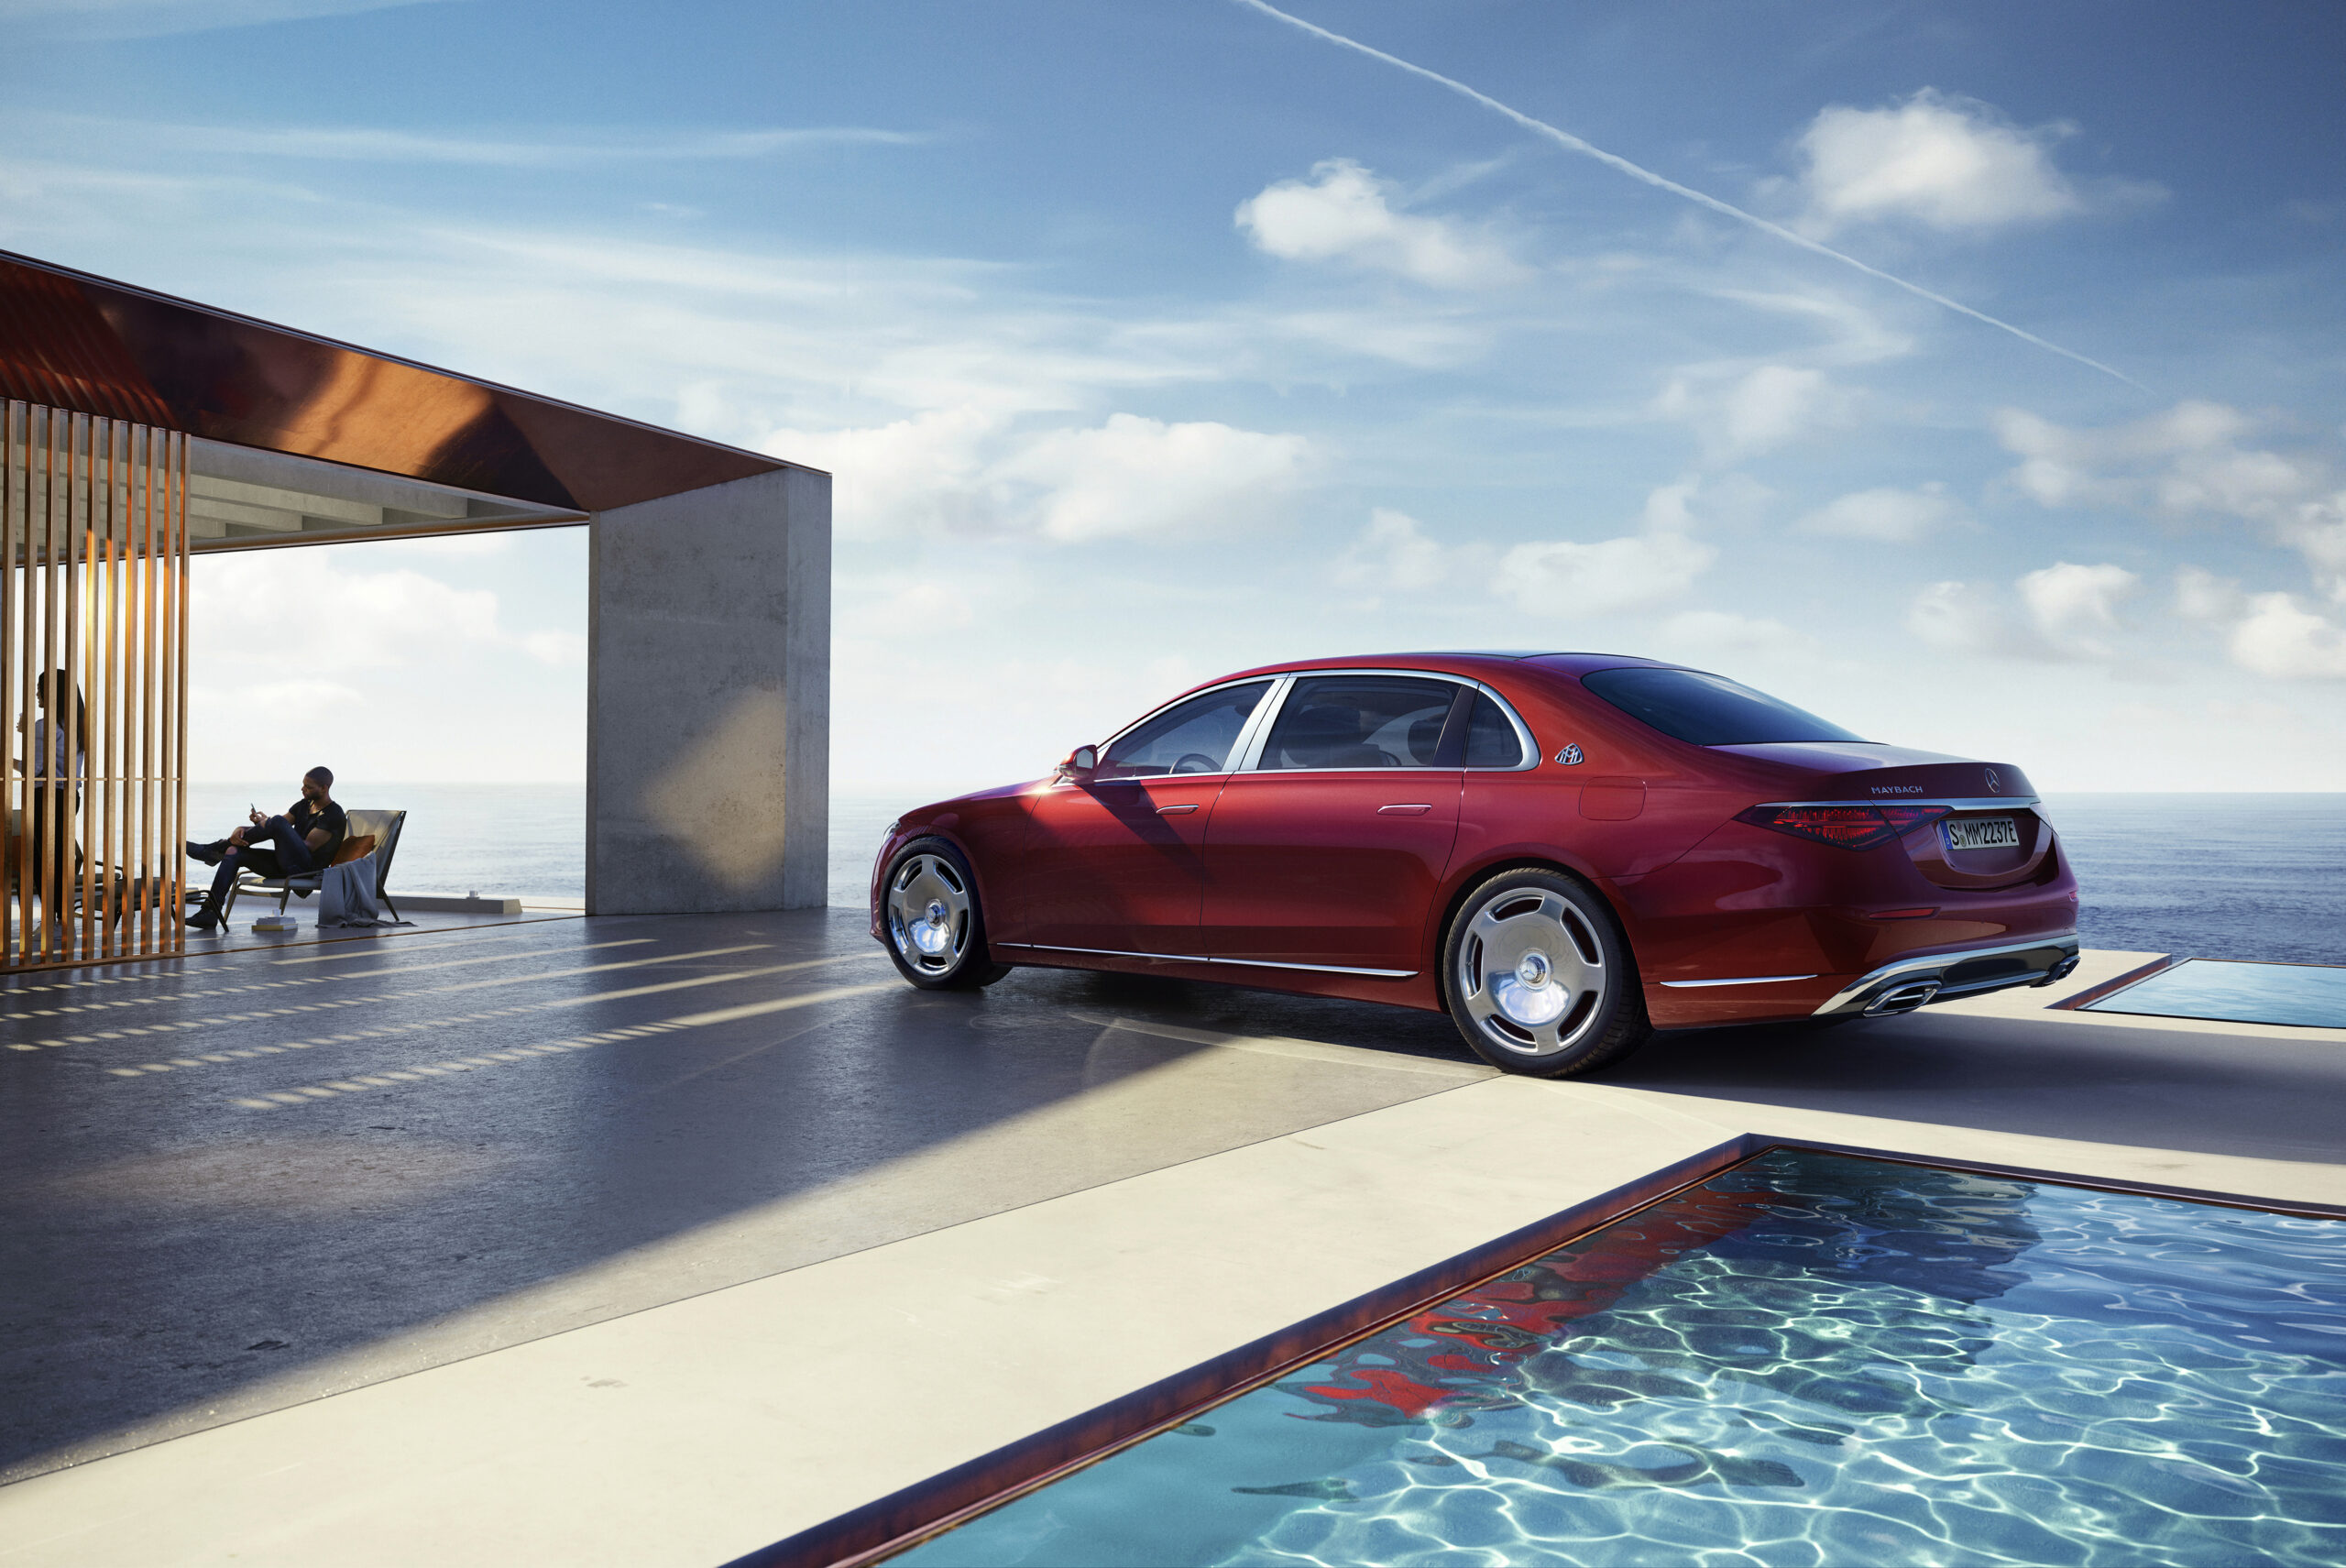 Mercedes-Maybach launches its first plug-in hybrid model S 580 e